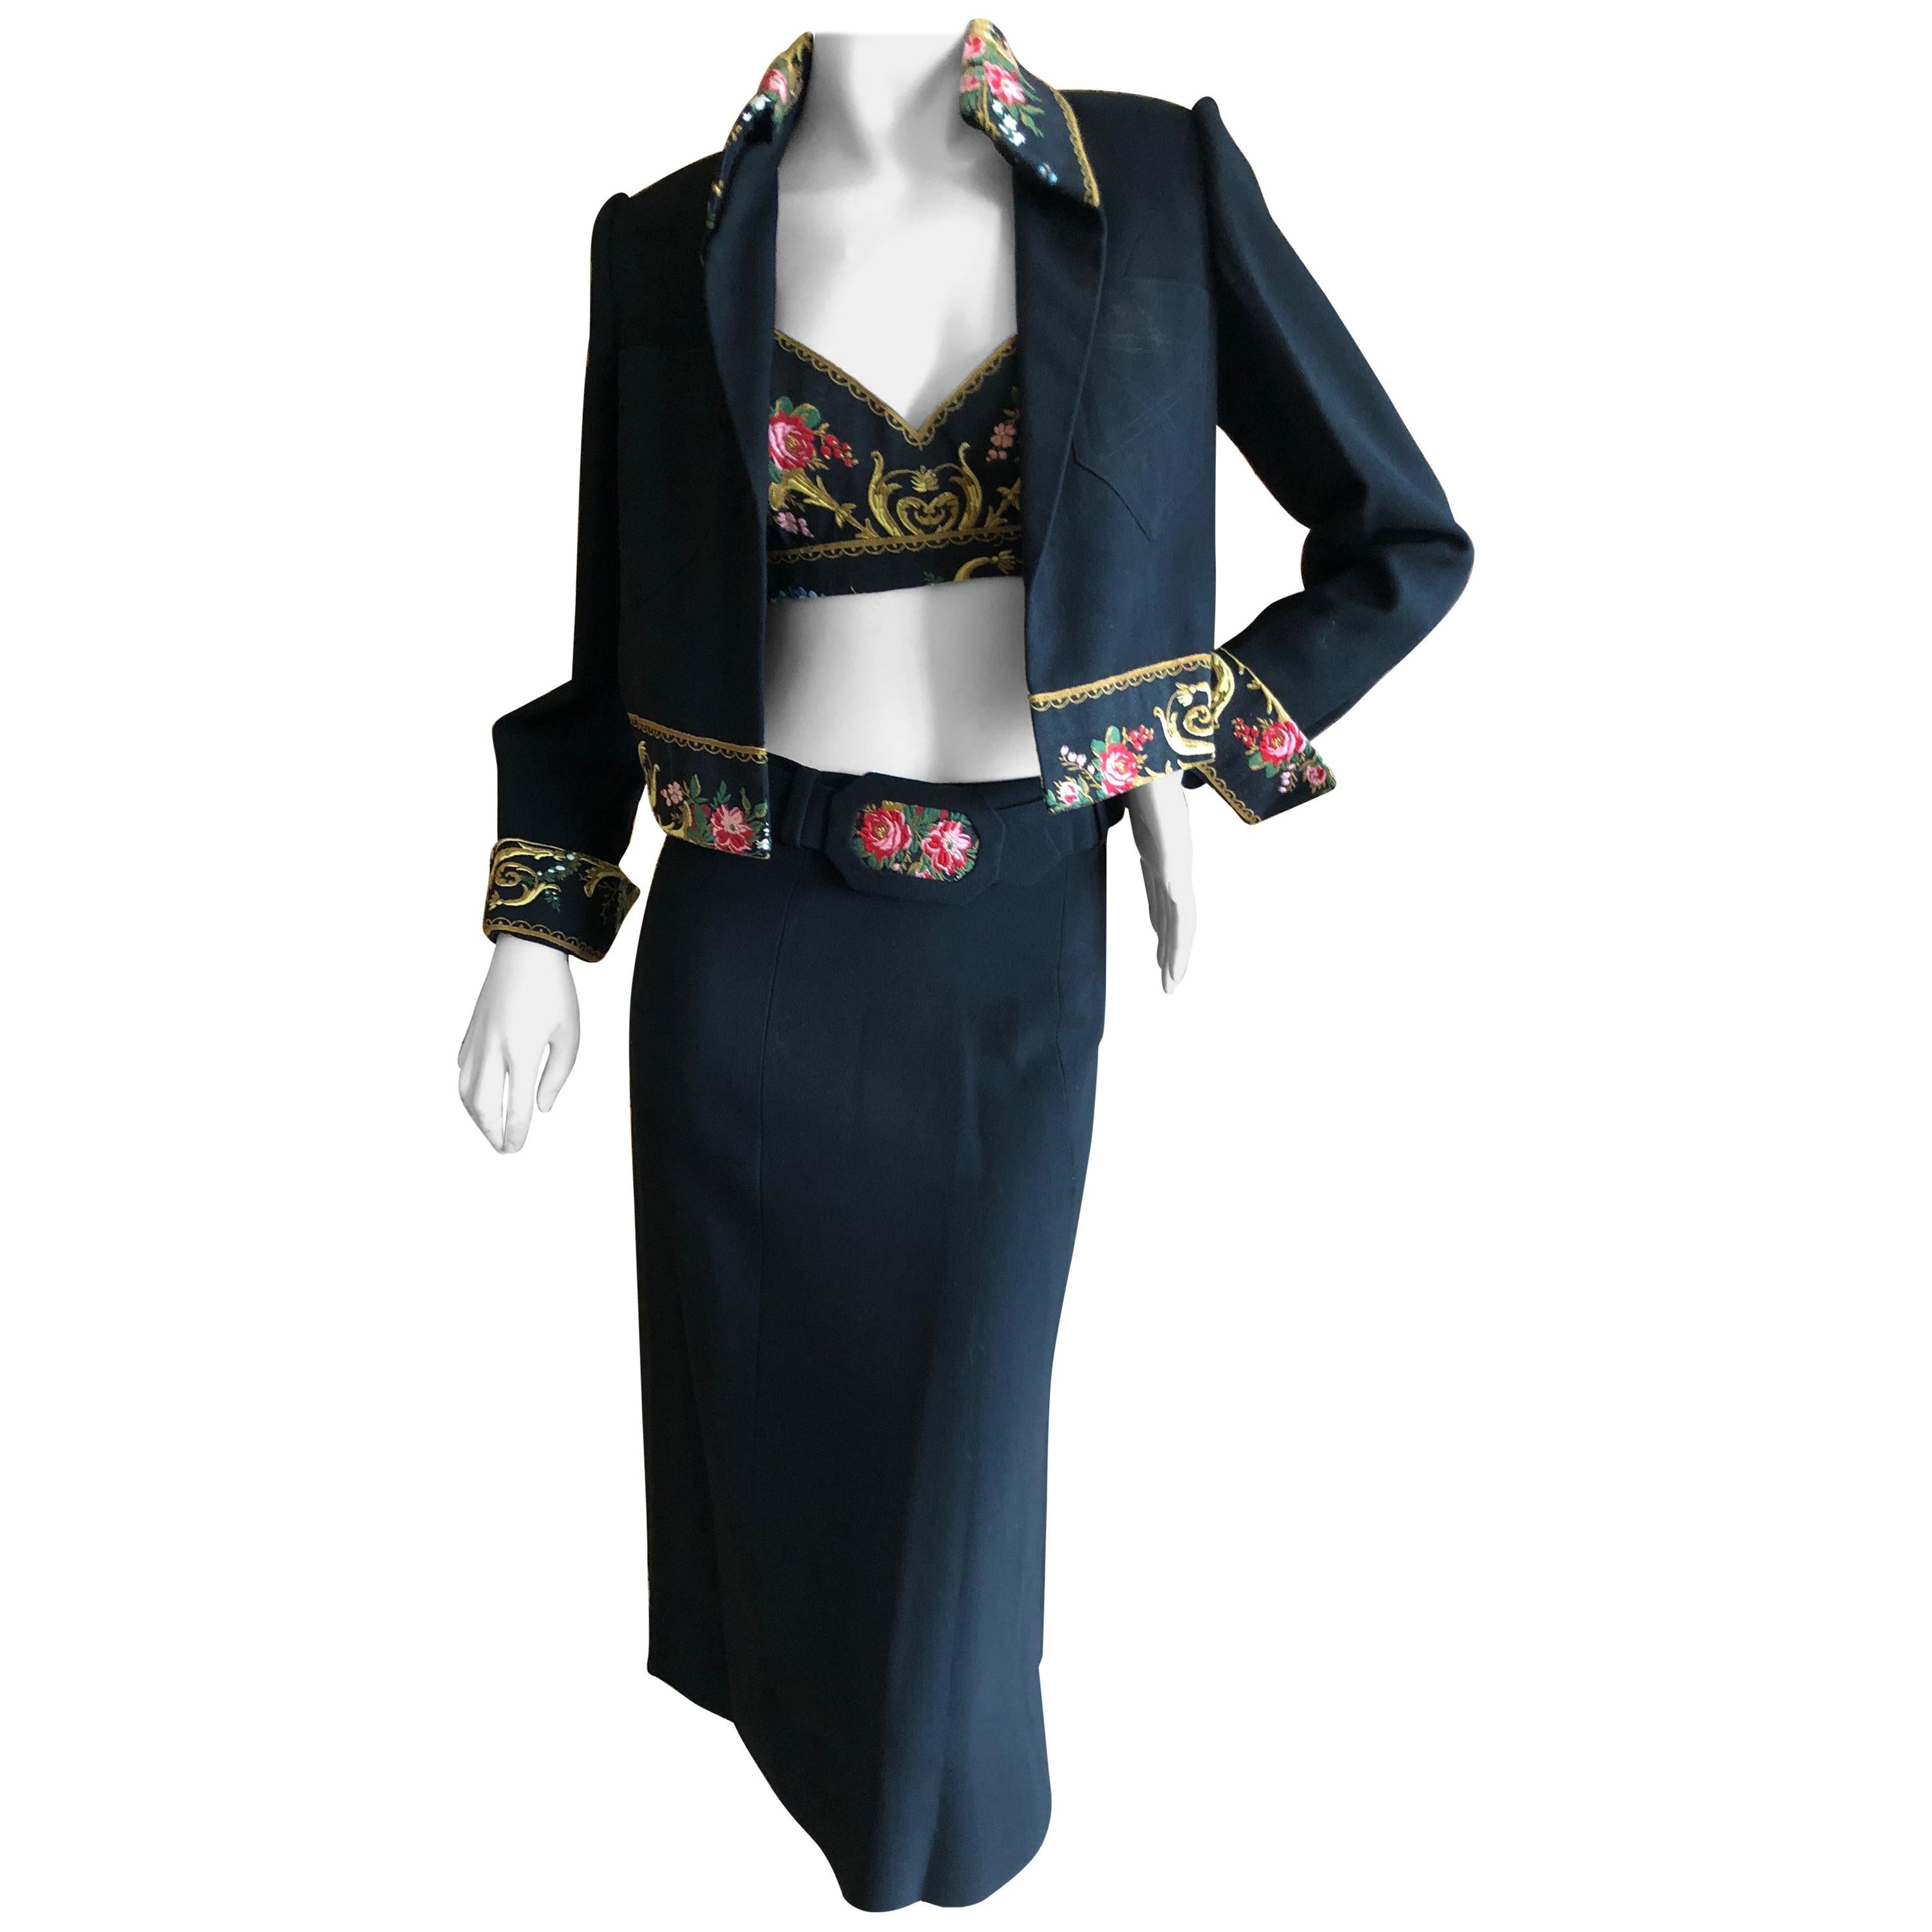 Cardinali Embroidered Black Cotton Skirt Suit with Midriff Baring Bra Fall 1971  For Sale